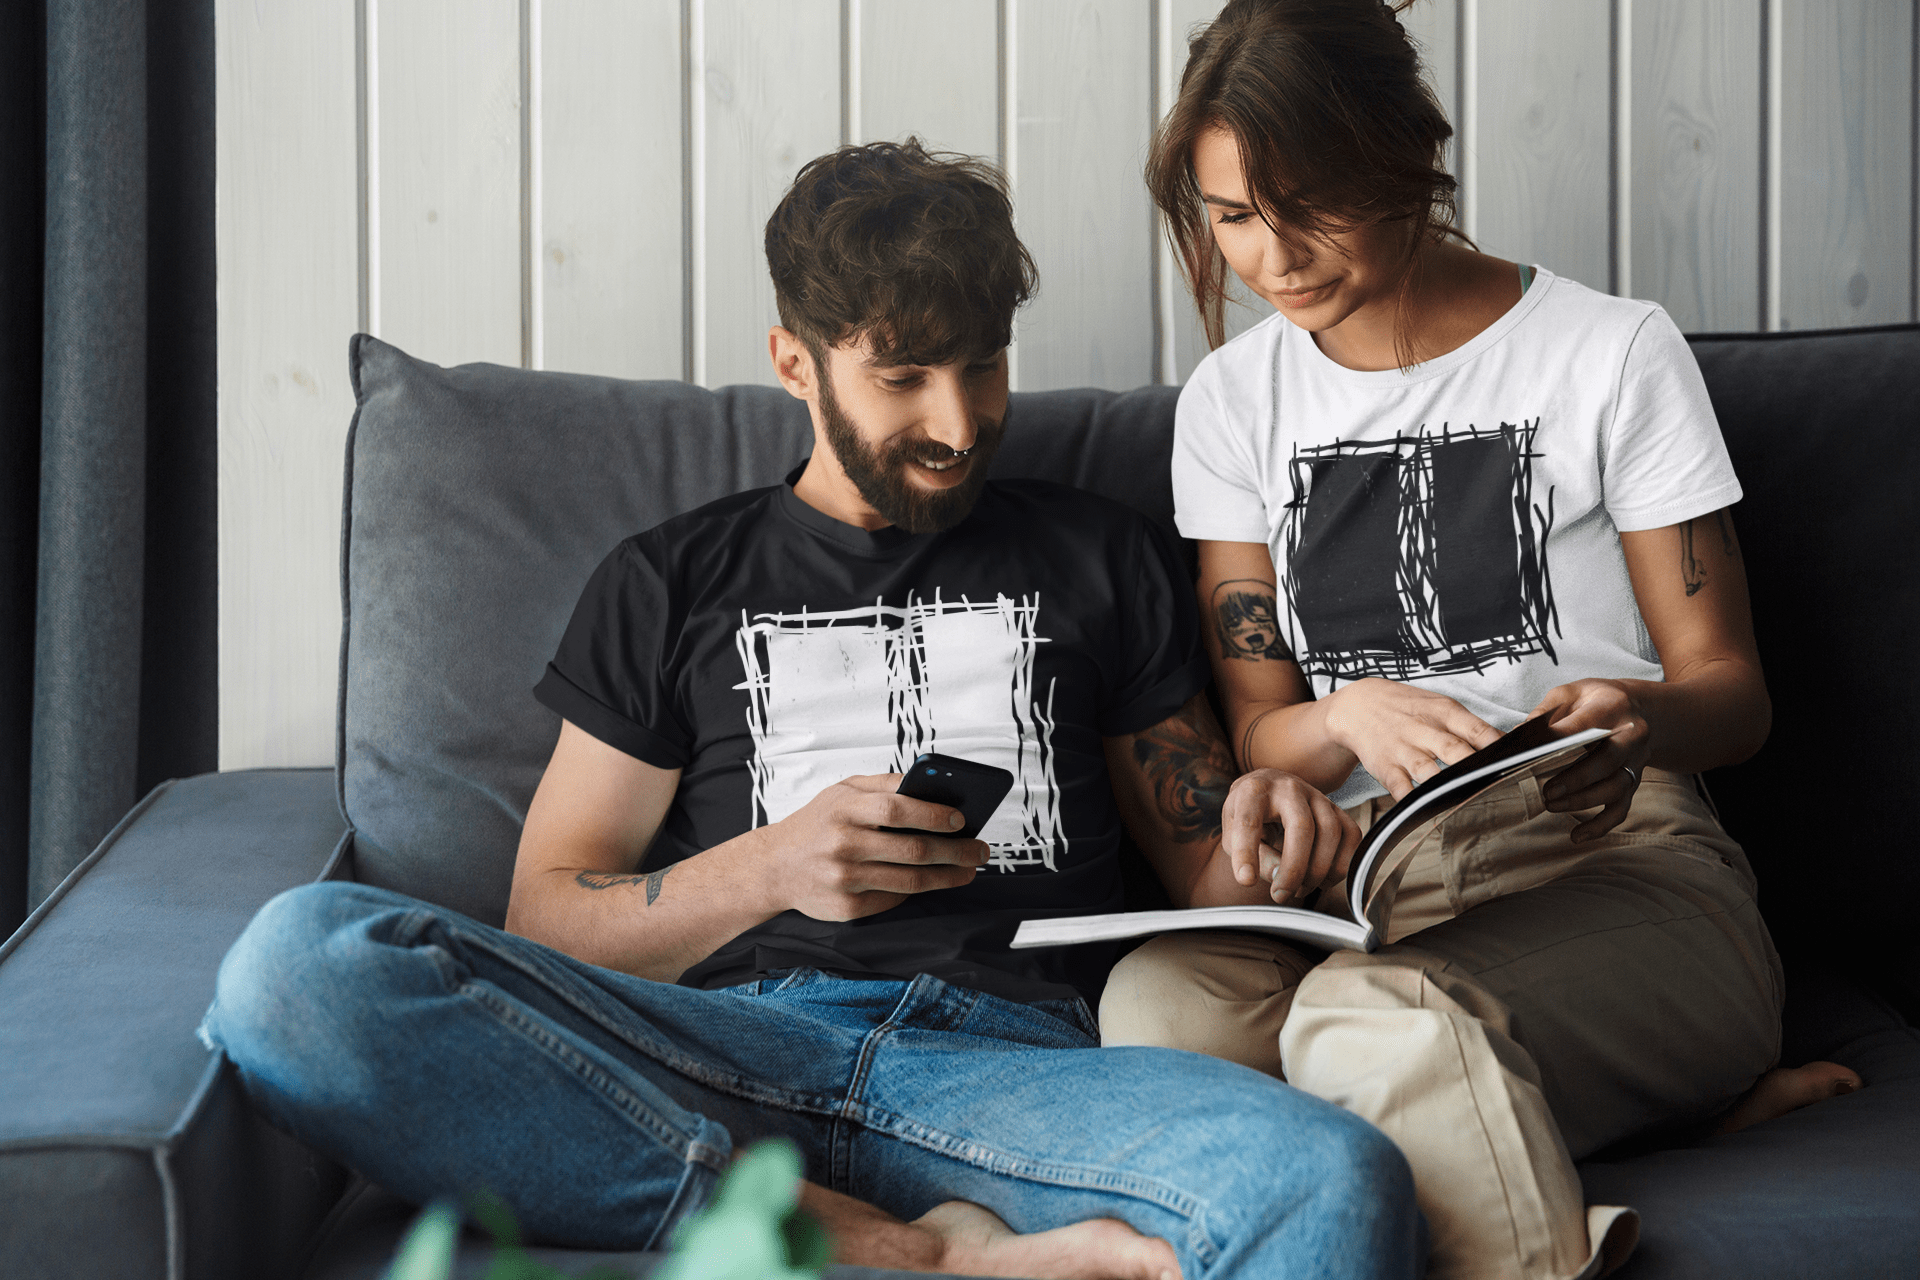 Lucina Black and White Abstract Modern Art Illustration Short-Sleeve Unisex T-Shirt Clothing T-shirts A Moment Of Now Women’s Boutique Clothing Online Lifestyle Store